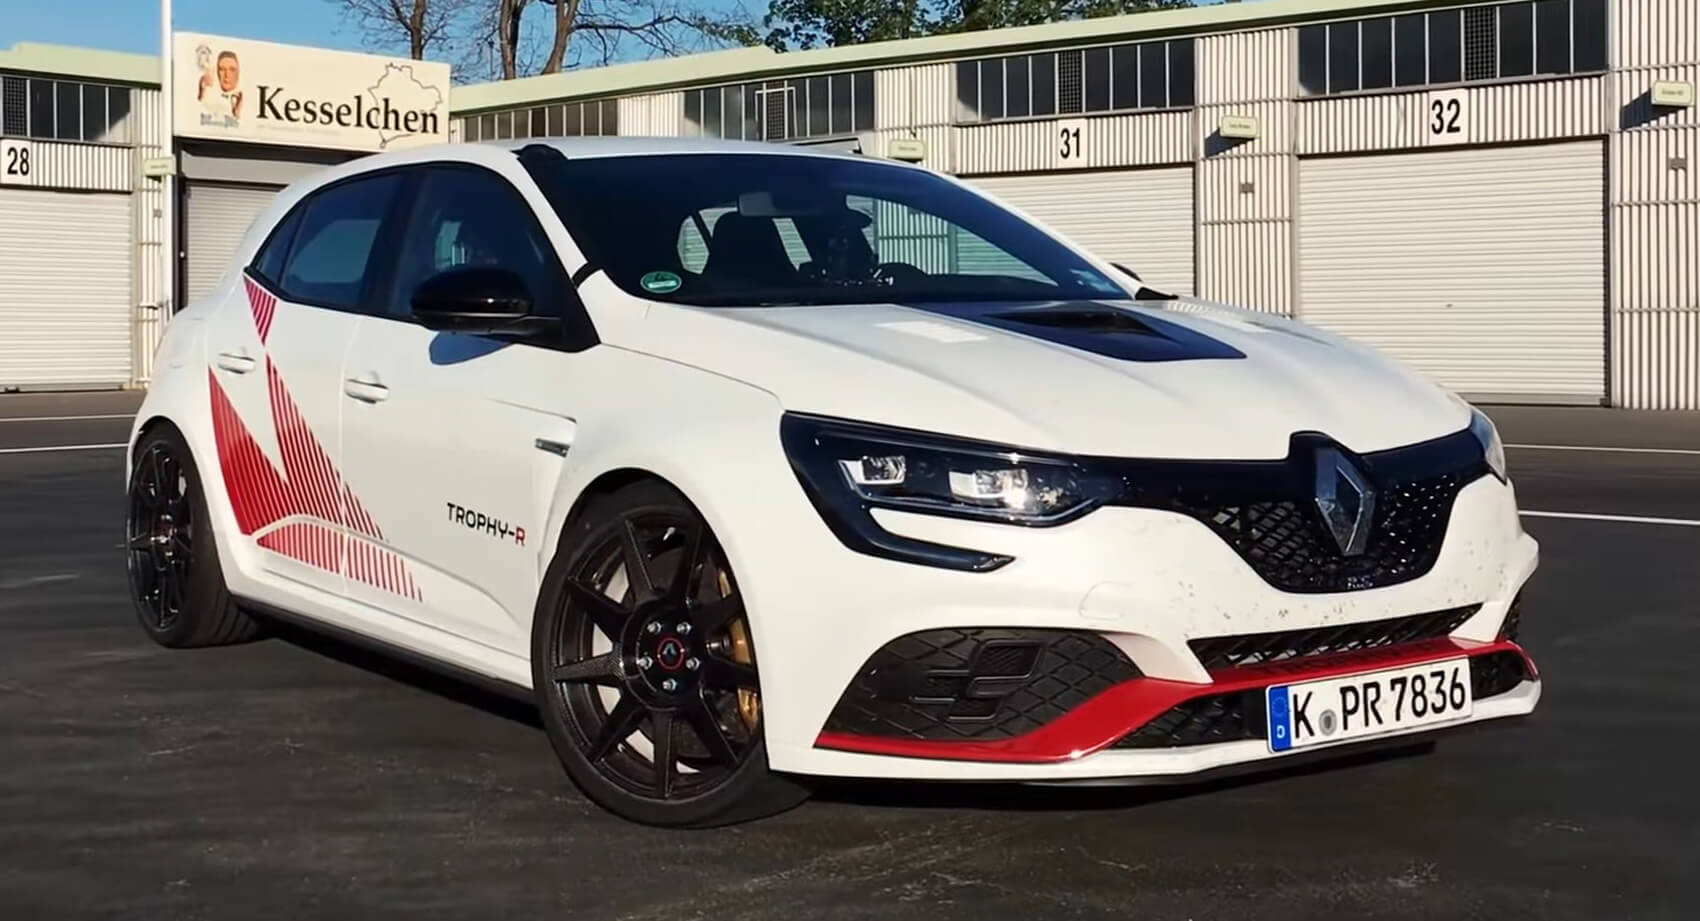 Sport Auto Laps With Renault Megane 15 Sec Than Official Record Run | Carscoops